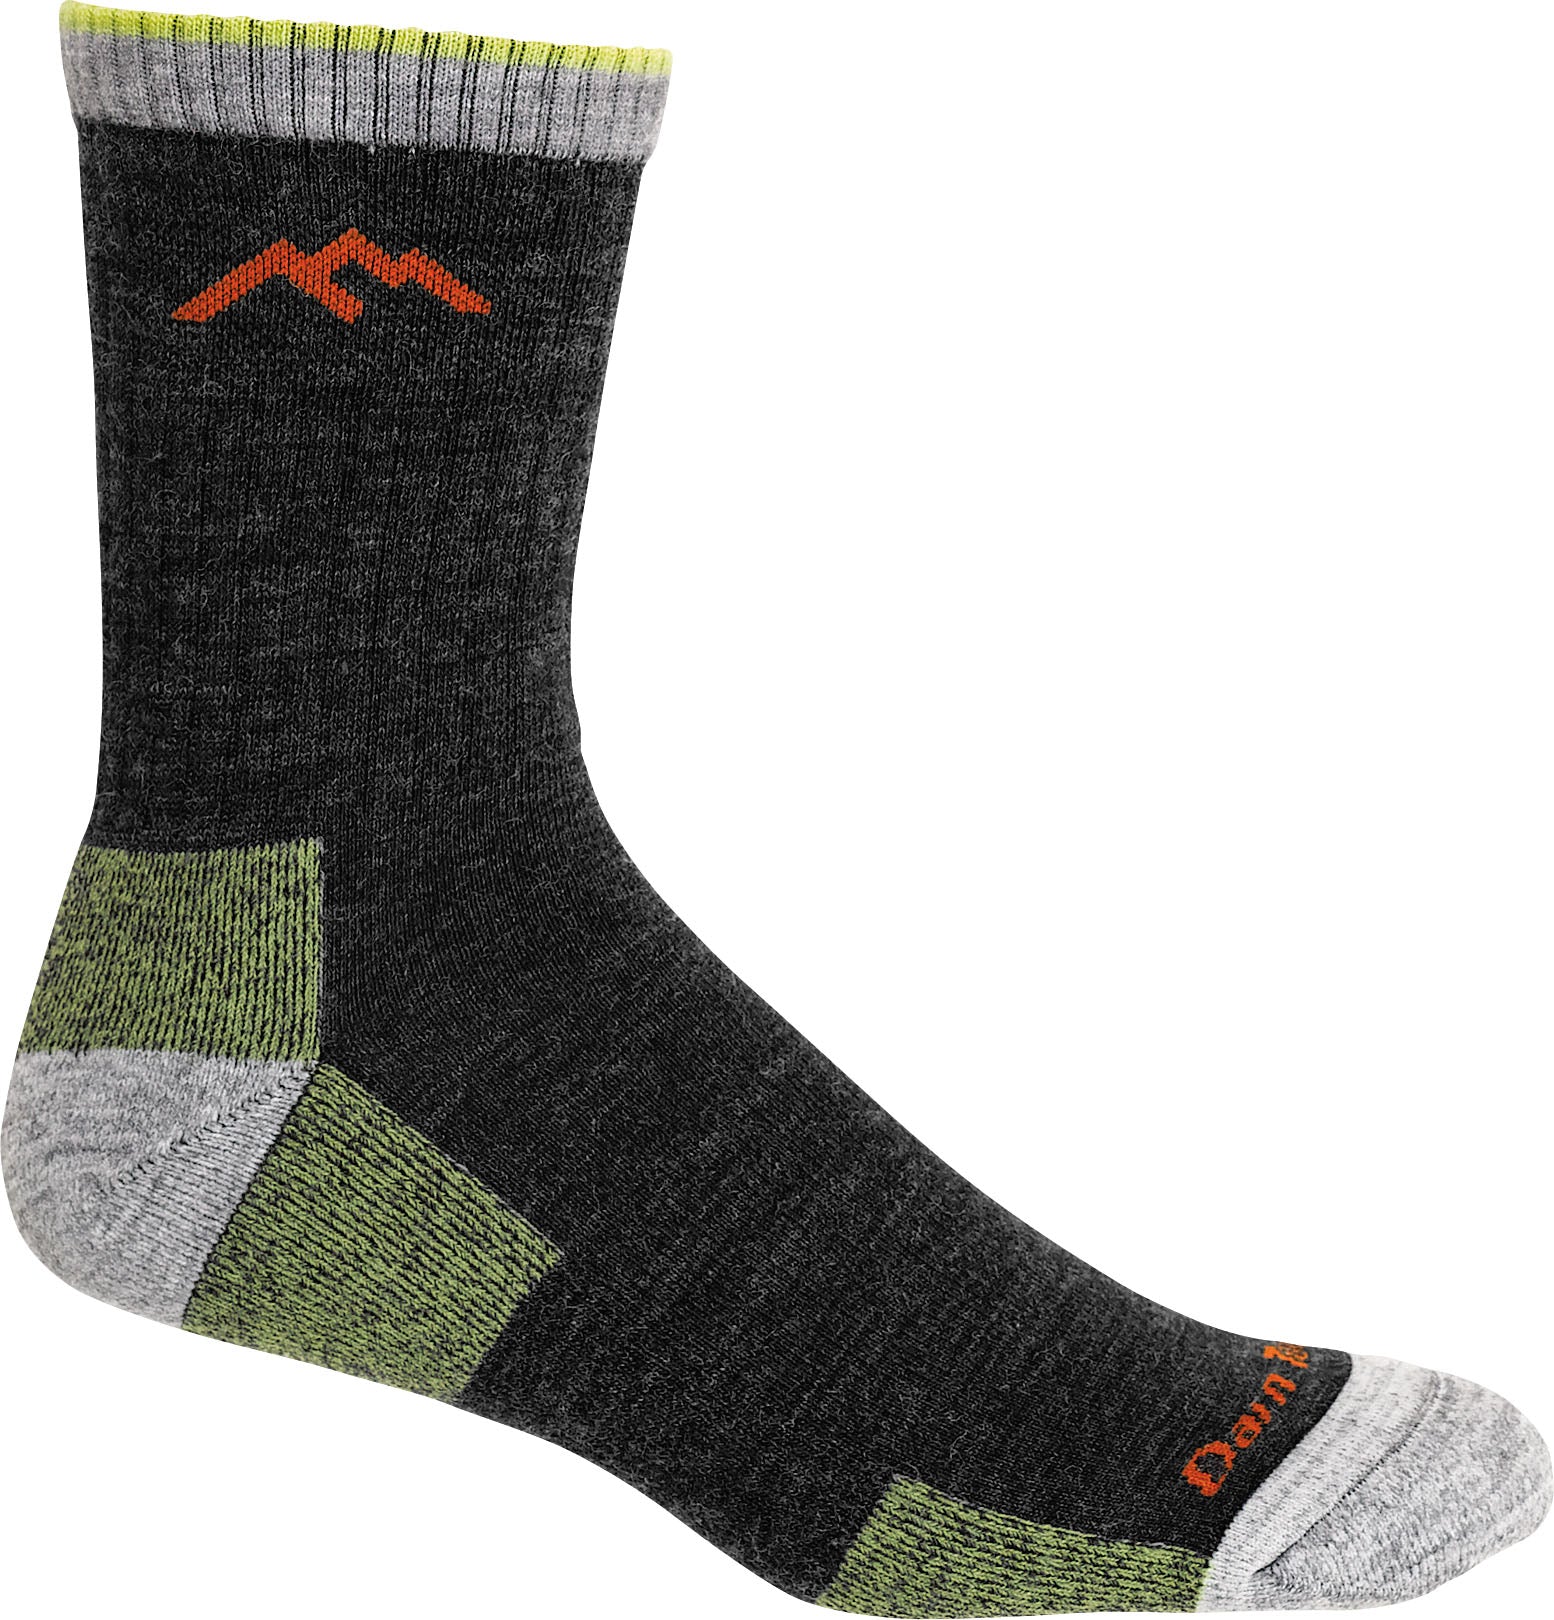 Darn Tough 1466 Hiker Micro Crew Midweight with Cushion Sock - Gear For Adventure